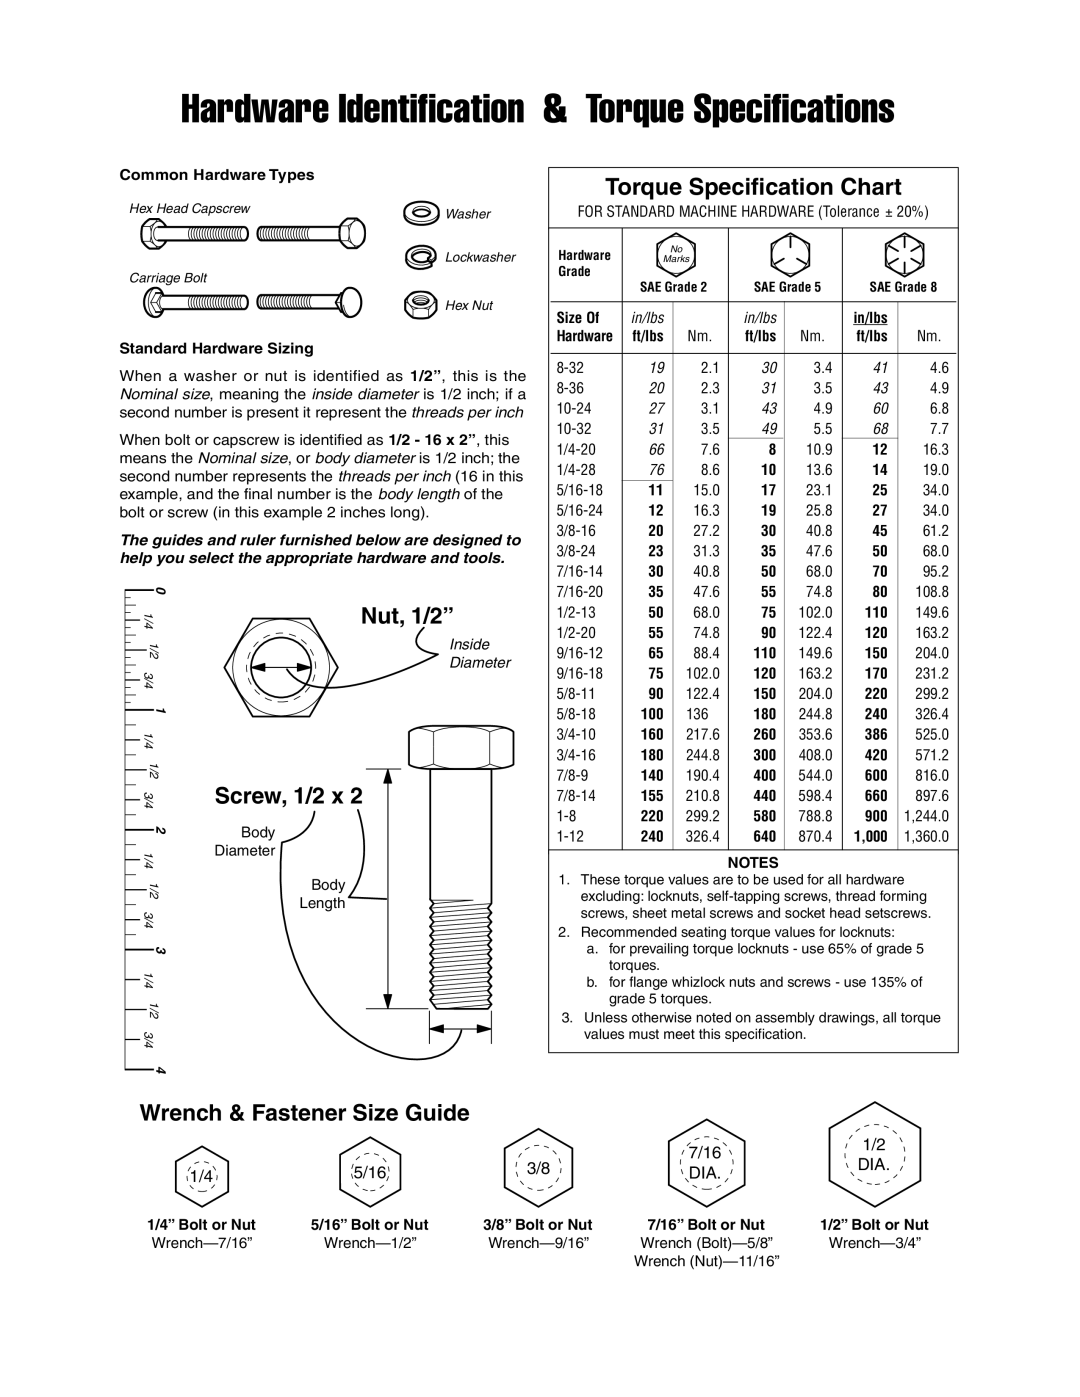 Simplicity 1694874 Wrench & Fastener Size Guide, Hardware Identification & Torque Specifications, Nut, 1/2”, Screw, 1/2 